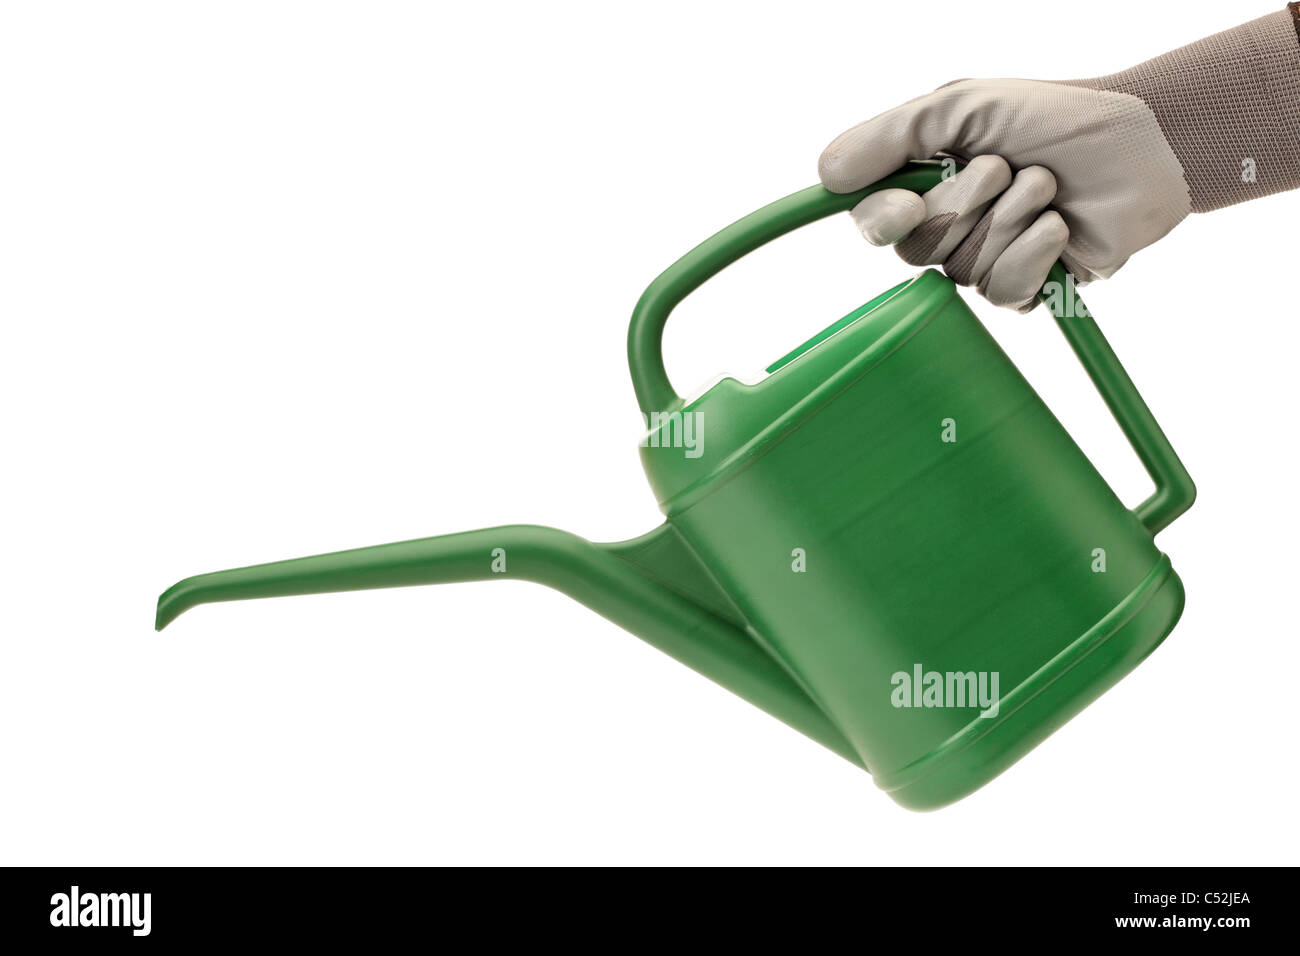 A person with gardening glove holding a watering can Stock Photo